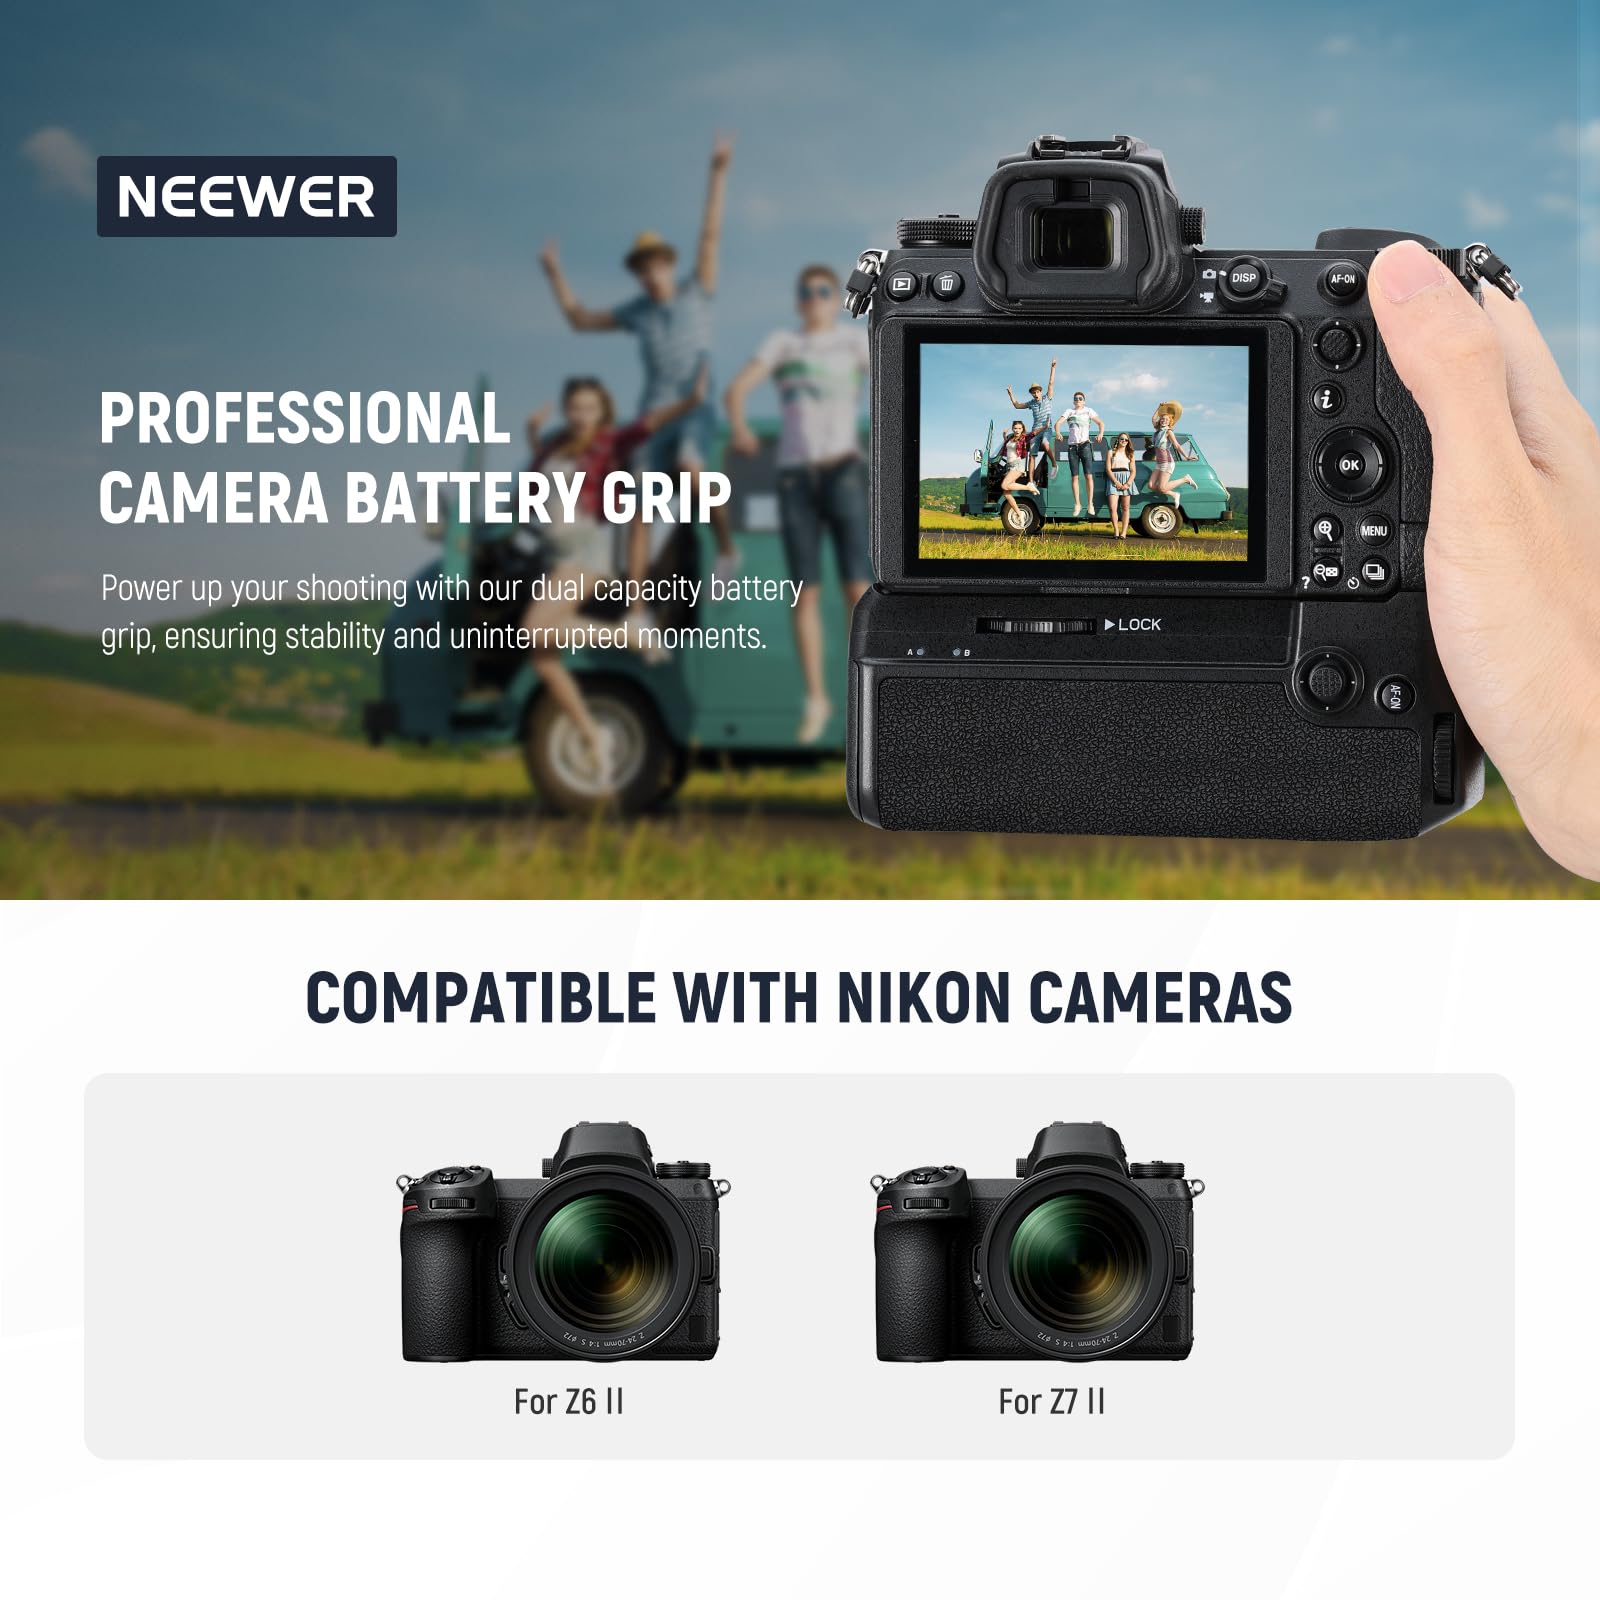 NEEWER MB-N11 Replacement Vertical Battery Grip, Compatible with Nikon Z6 II & Z7 II Camera and EN-EL15c Battery for Vertical Shooting with Shutter Release, Main Dial,AF ON Button & 1/4" Tripod Socket